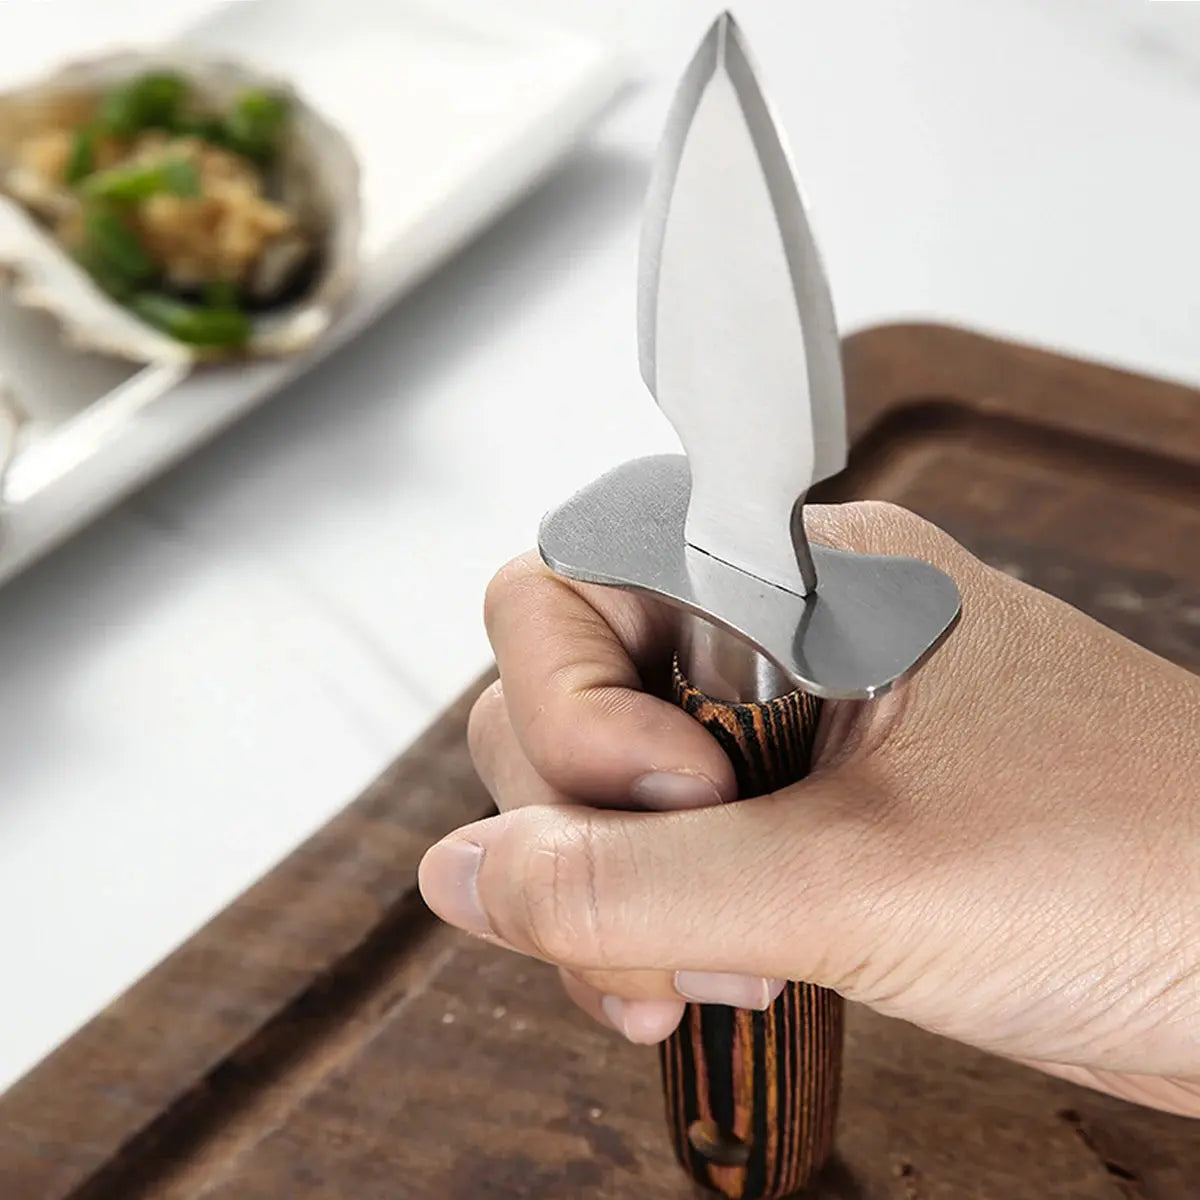 Stainless Steel oyster shucker – Kyoku Knives